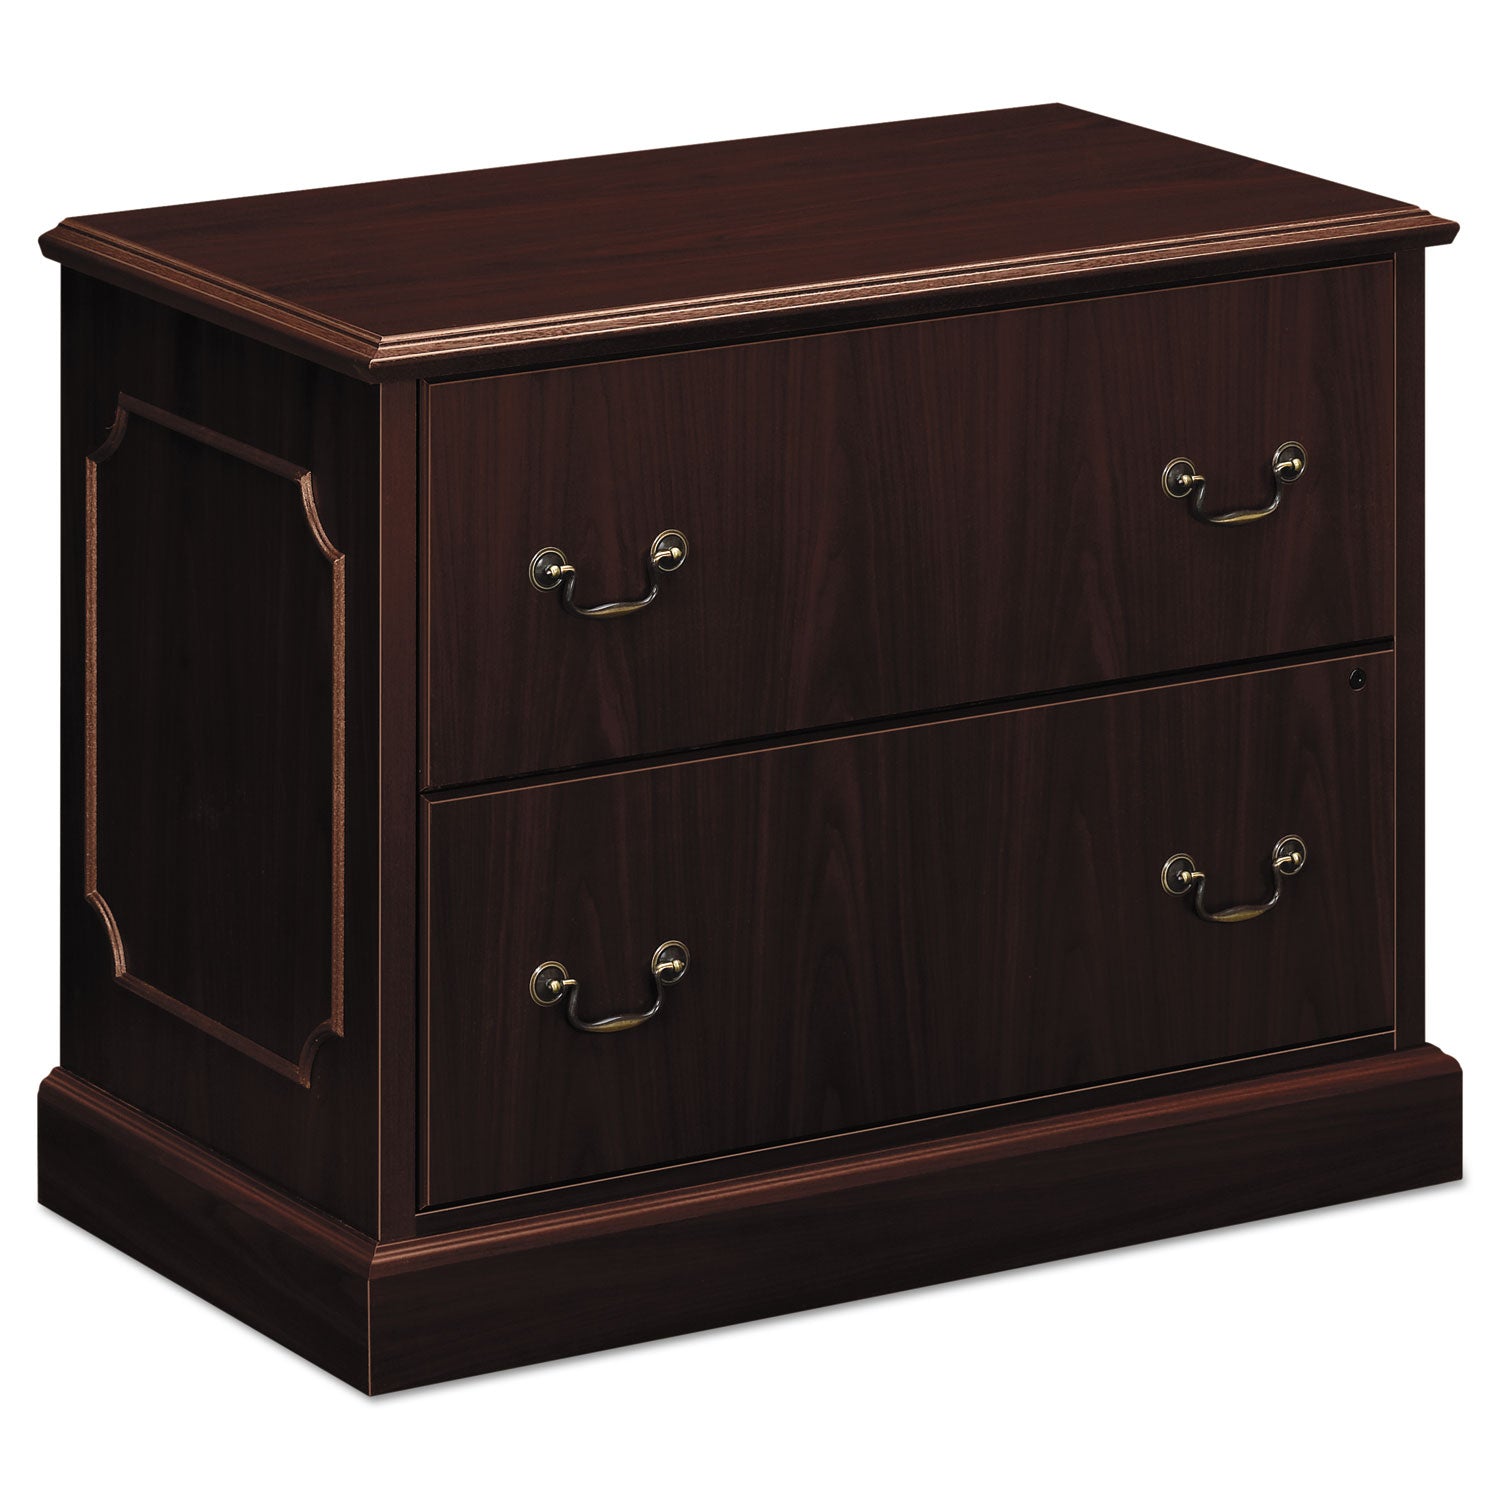 94000 Series Lateral File, 2 File Drawers, Mahogany, 37.5" x 20.5" x 29.5 - 